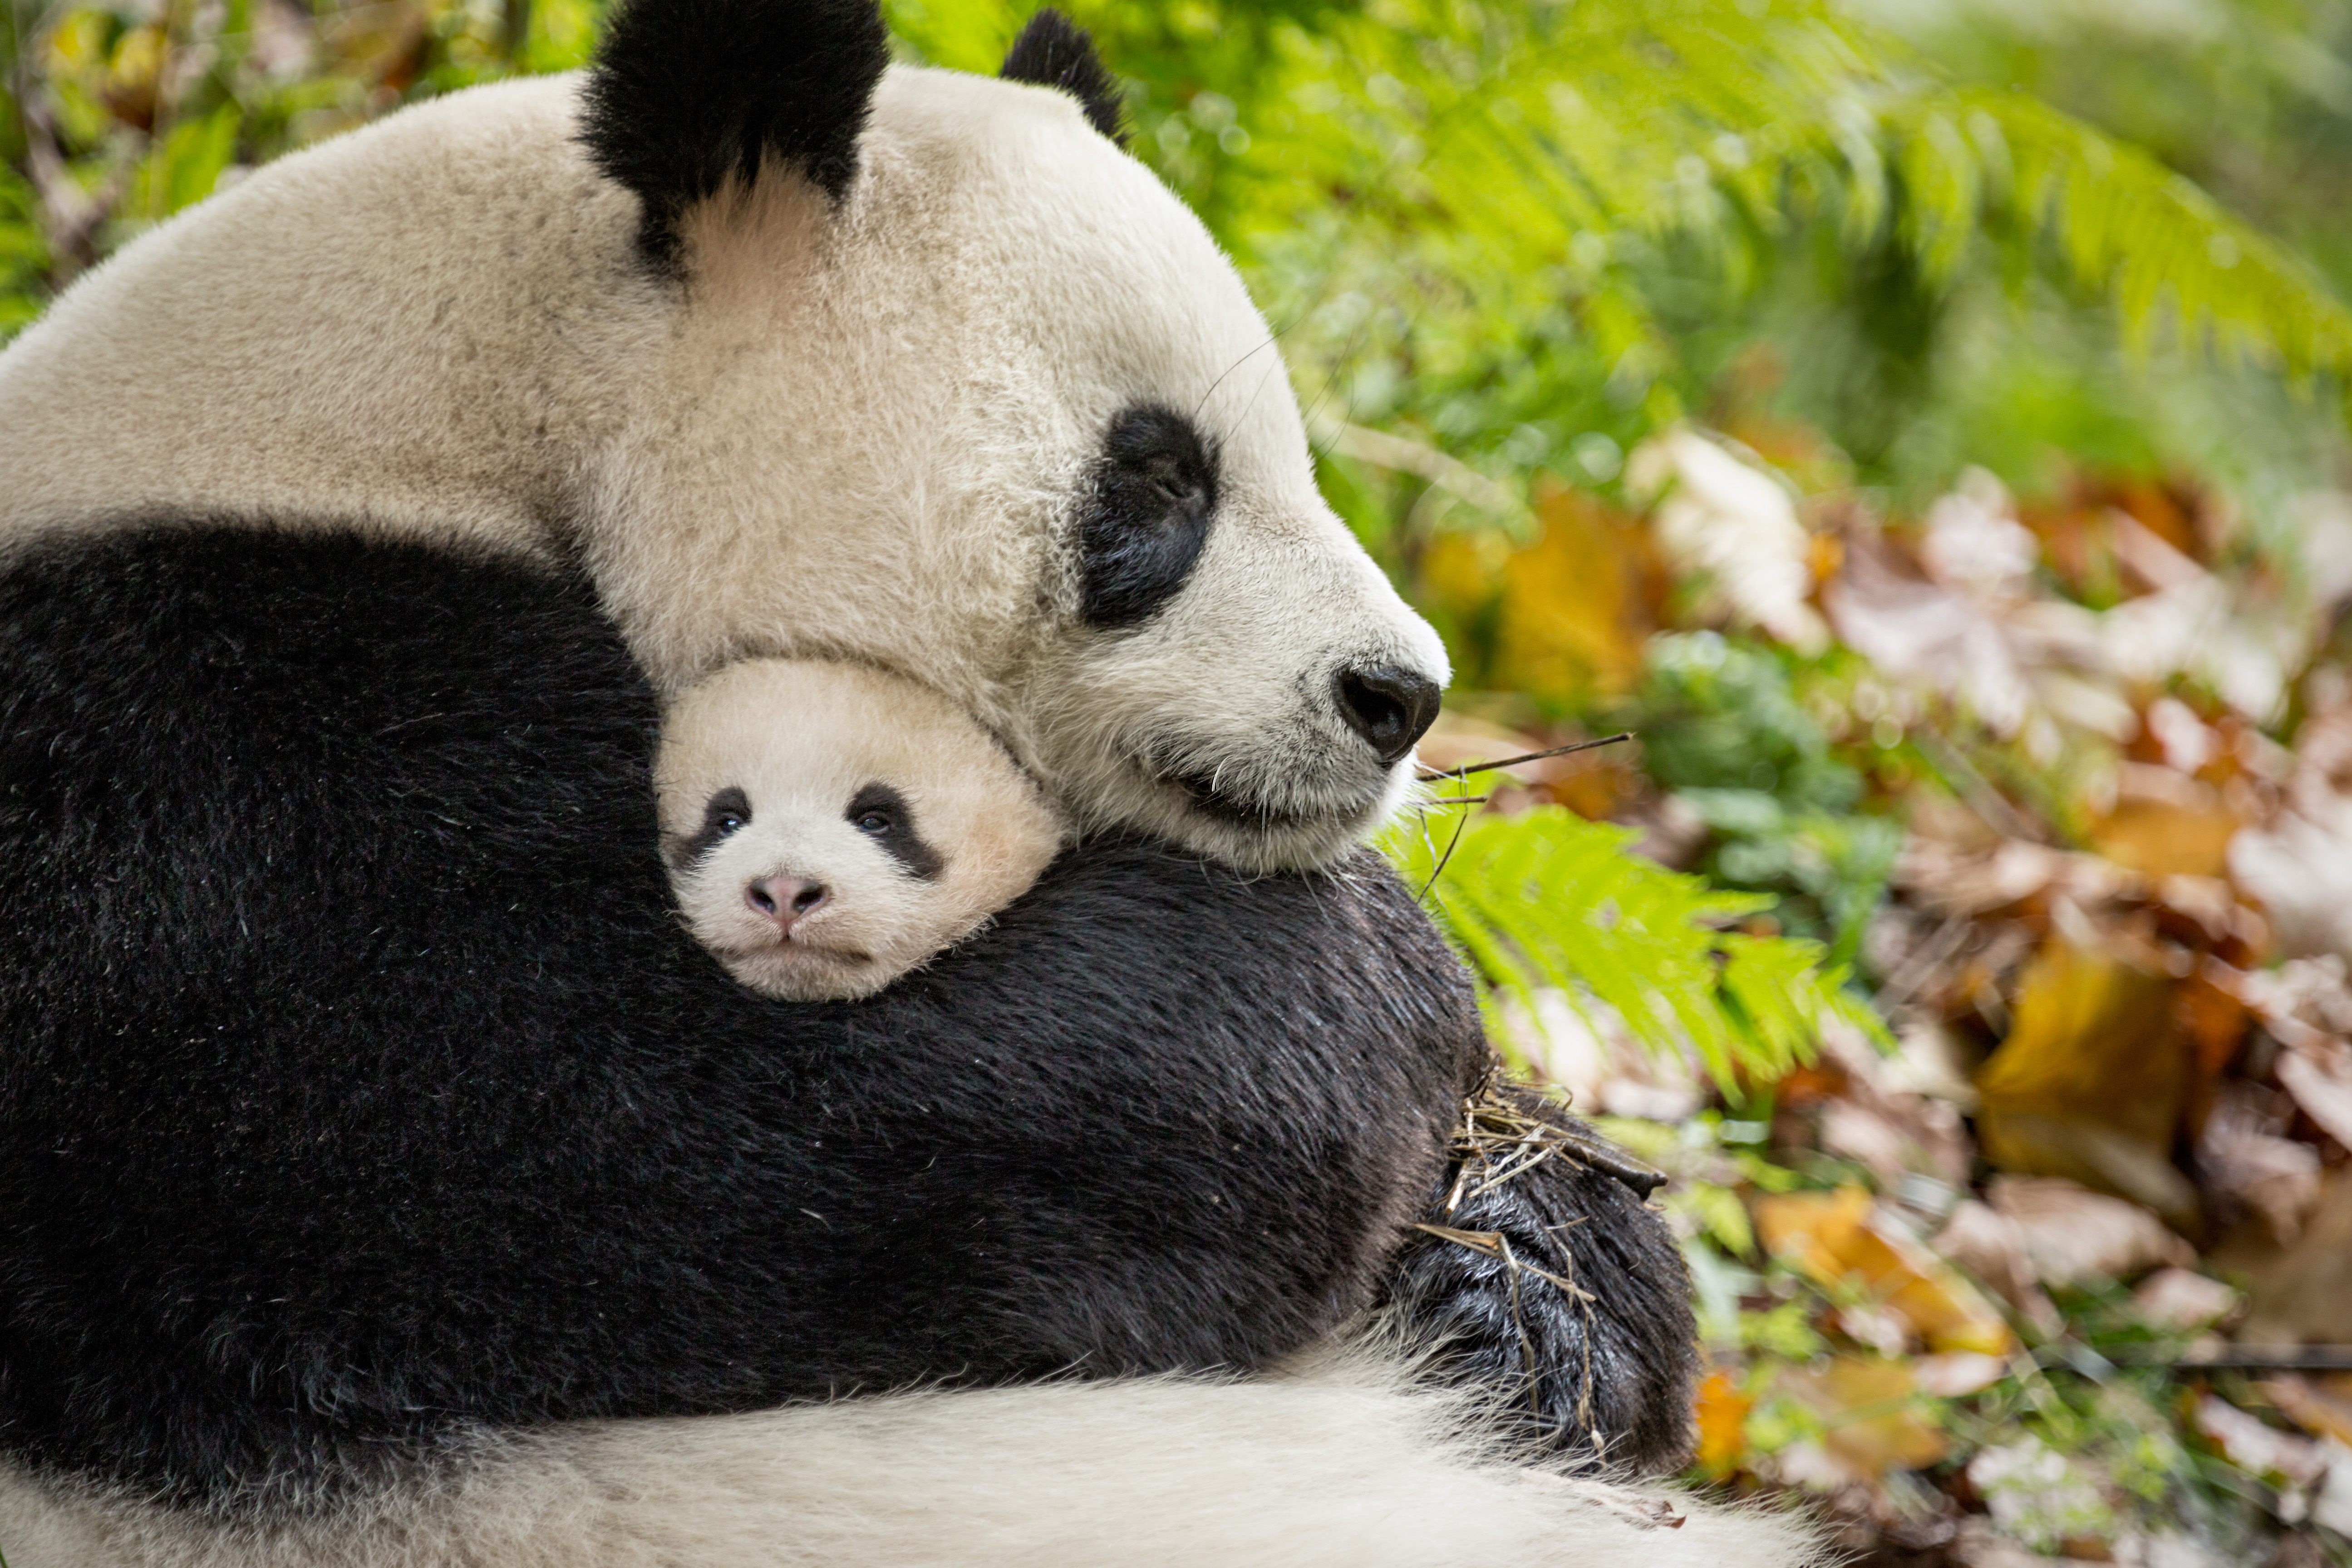 Movie Review: Disneynature Born in China